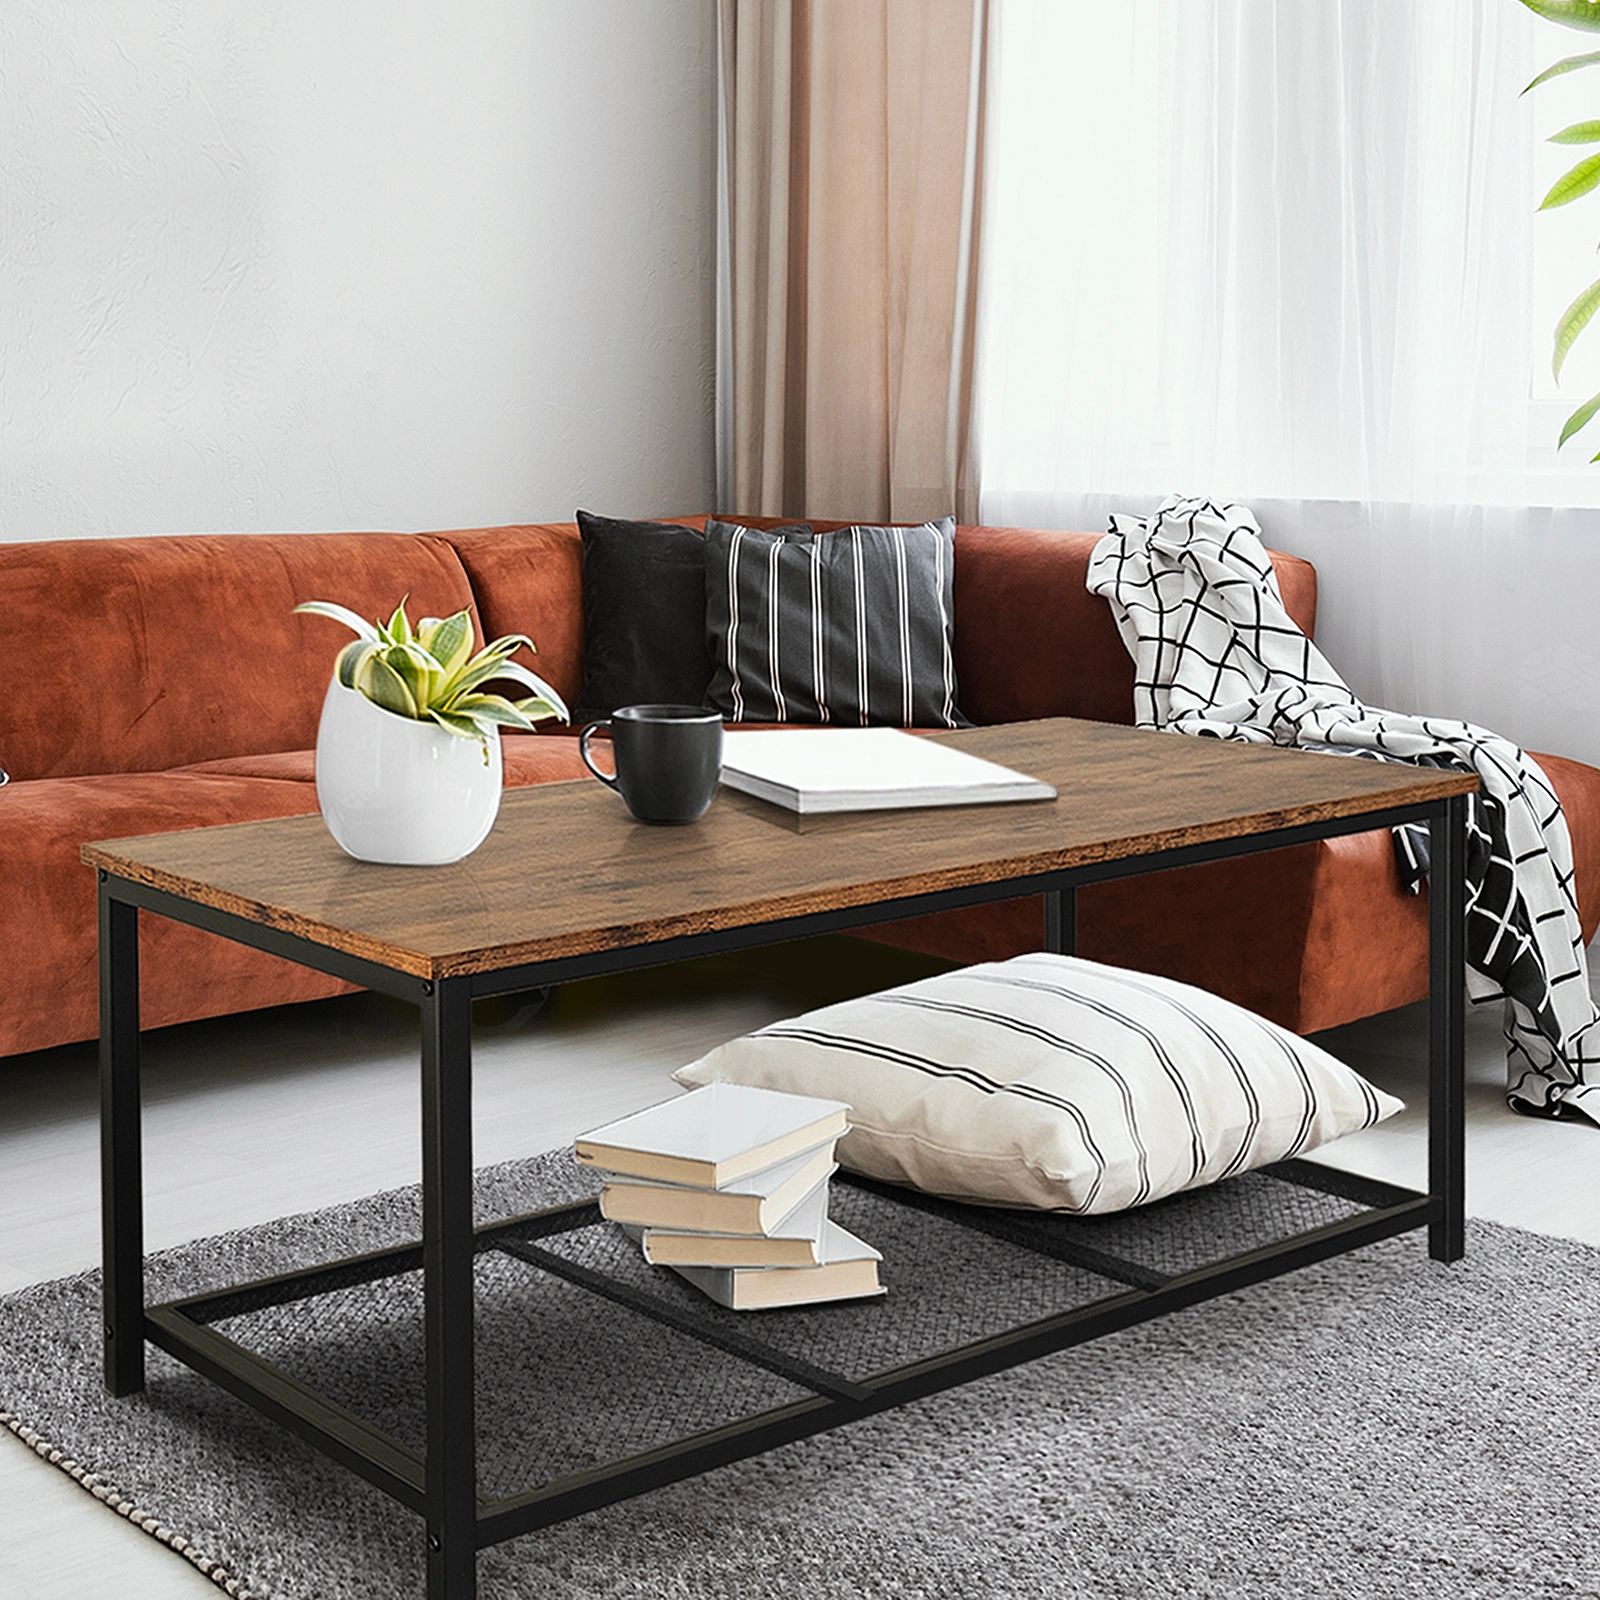 Industrial Coffee Table with Steel Frame and Storage-CASAINC